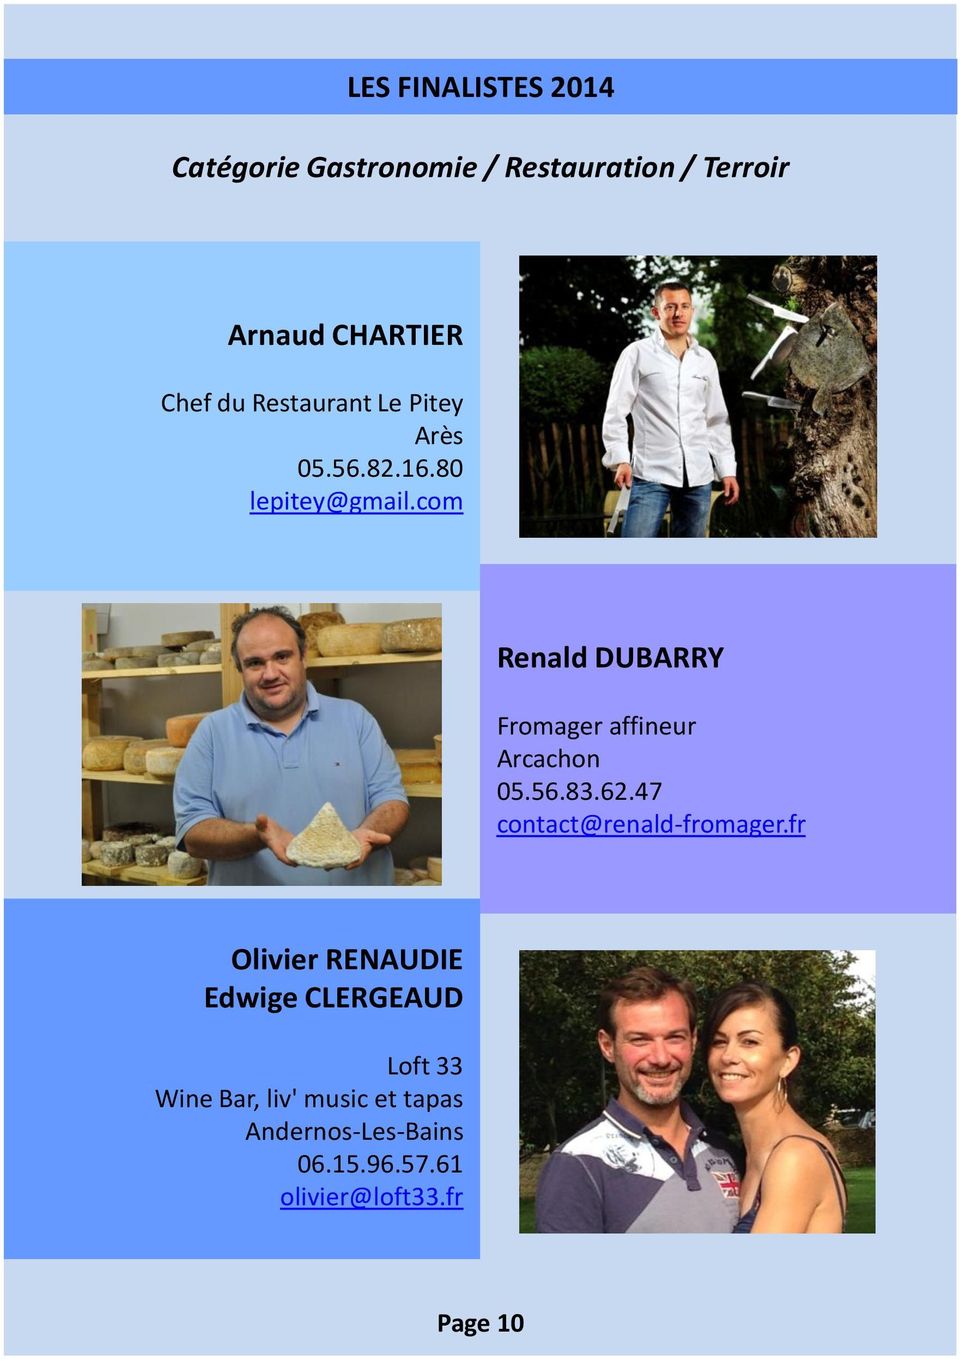 com Renald DUBARRY Fromager affineur Arcachon 05.56.83.62.47 contact@renald-fromager.